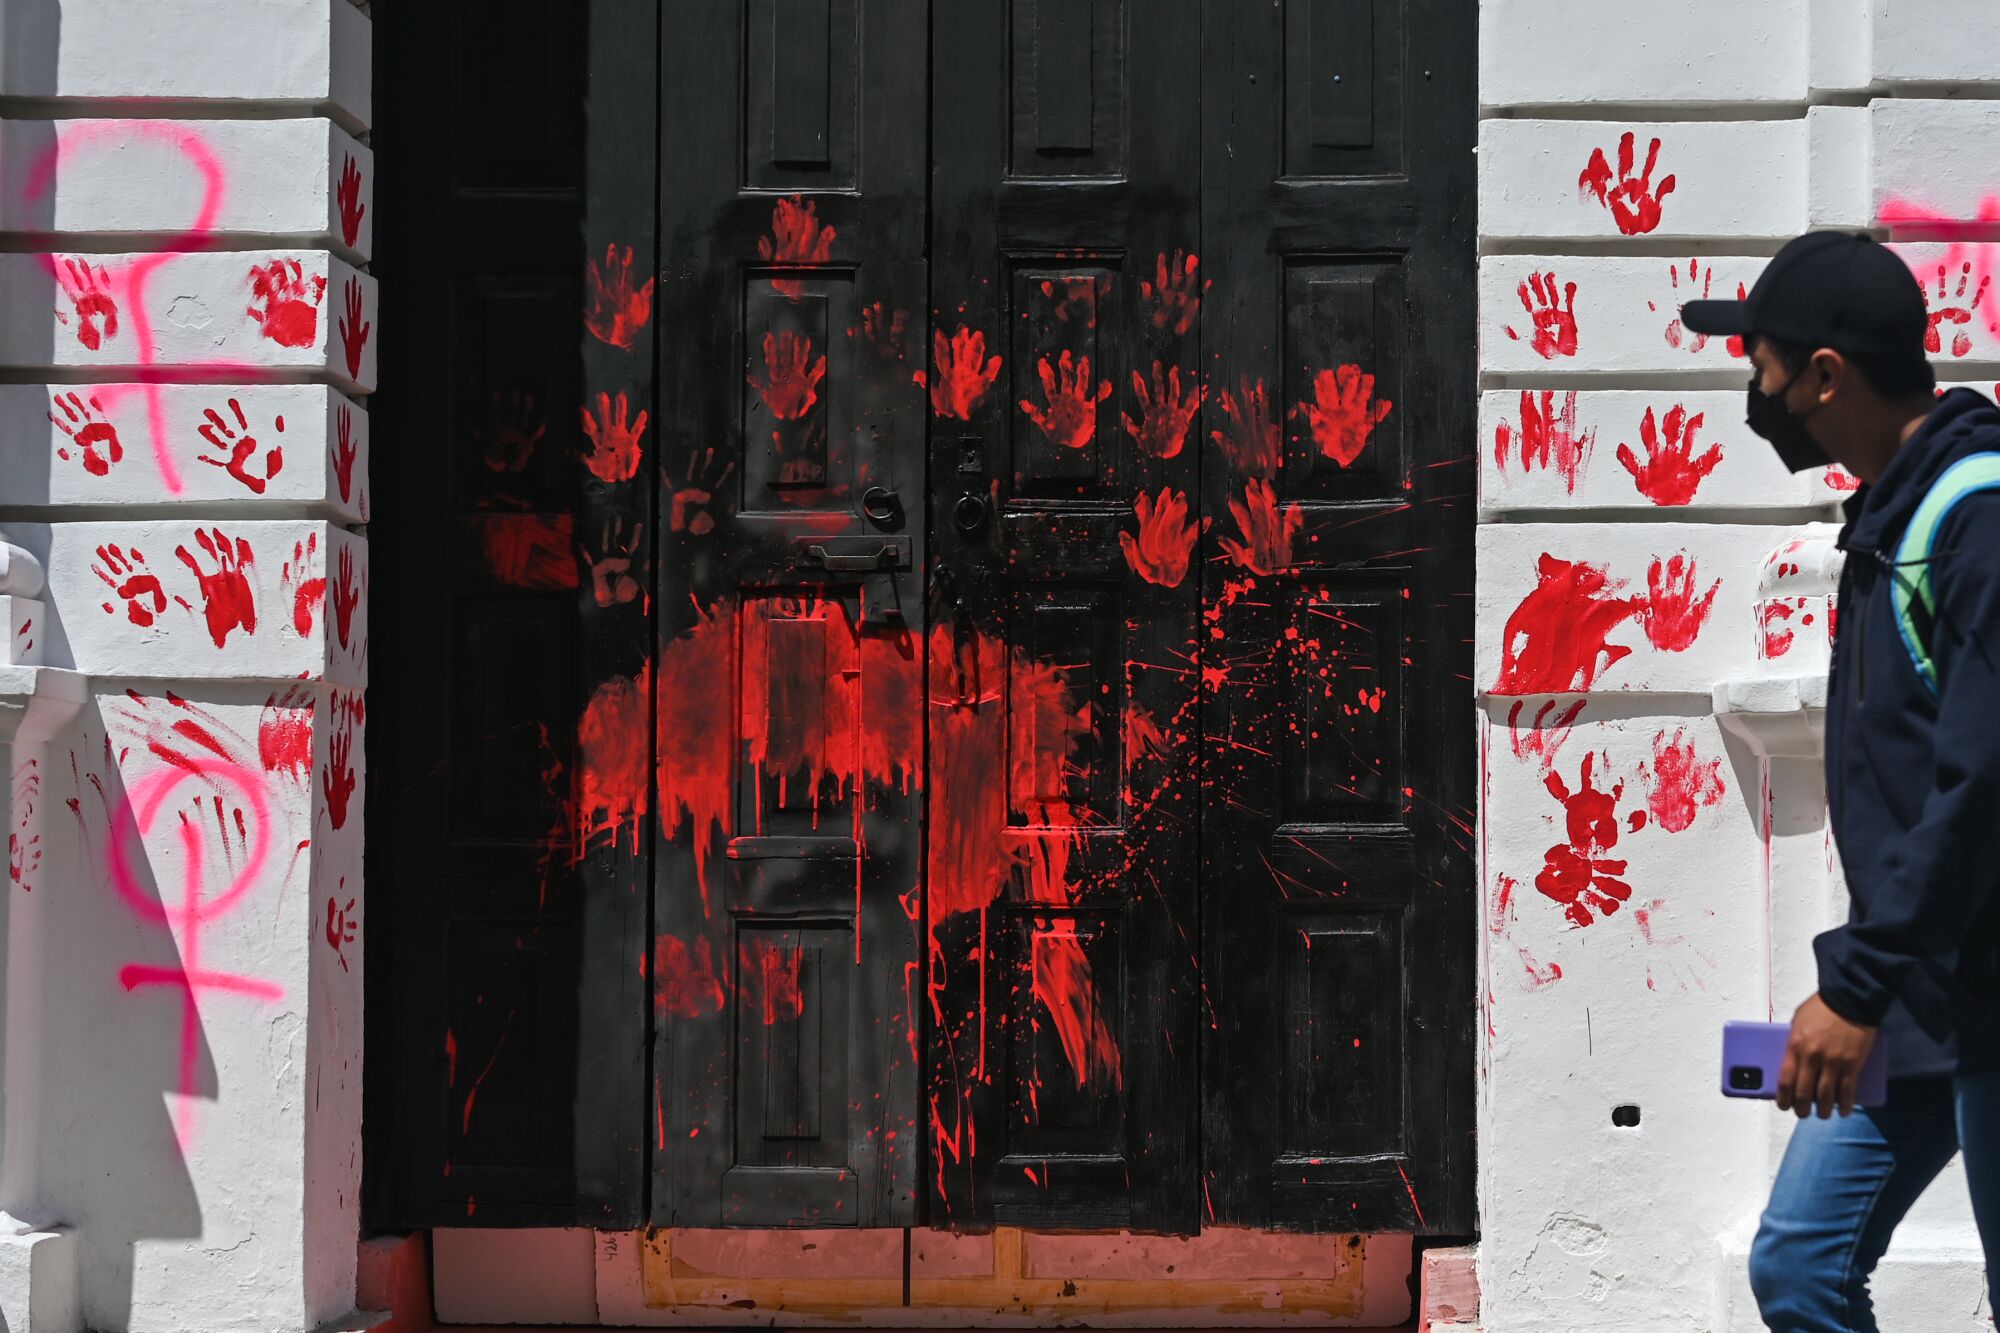 A man passes graffiti related to feminism and a vandalized front door.